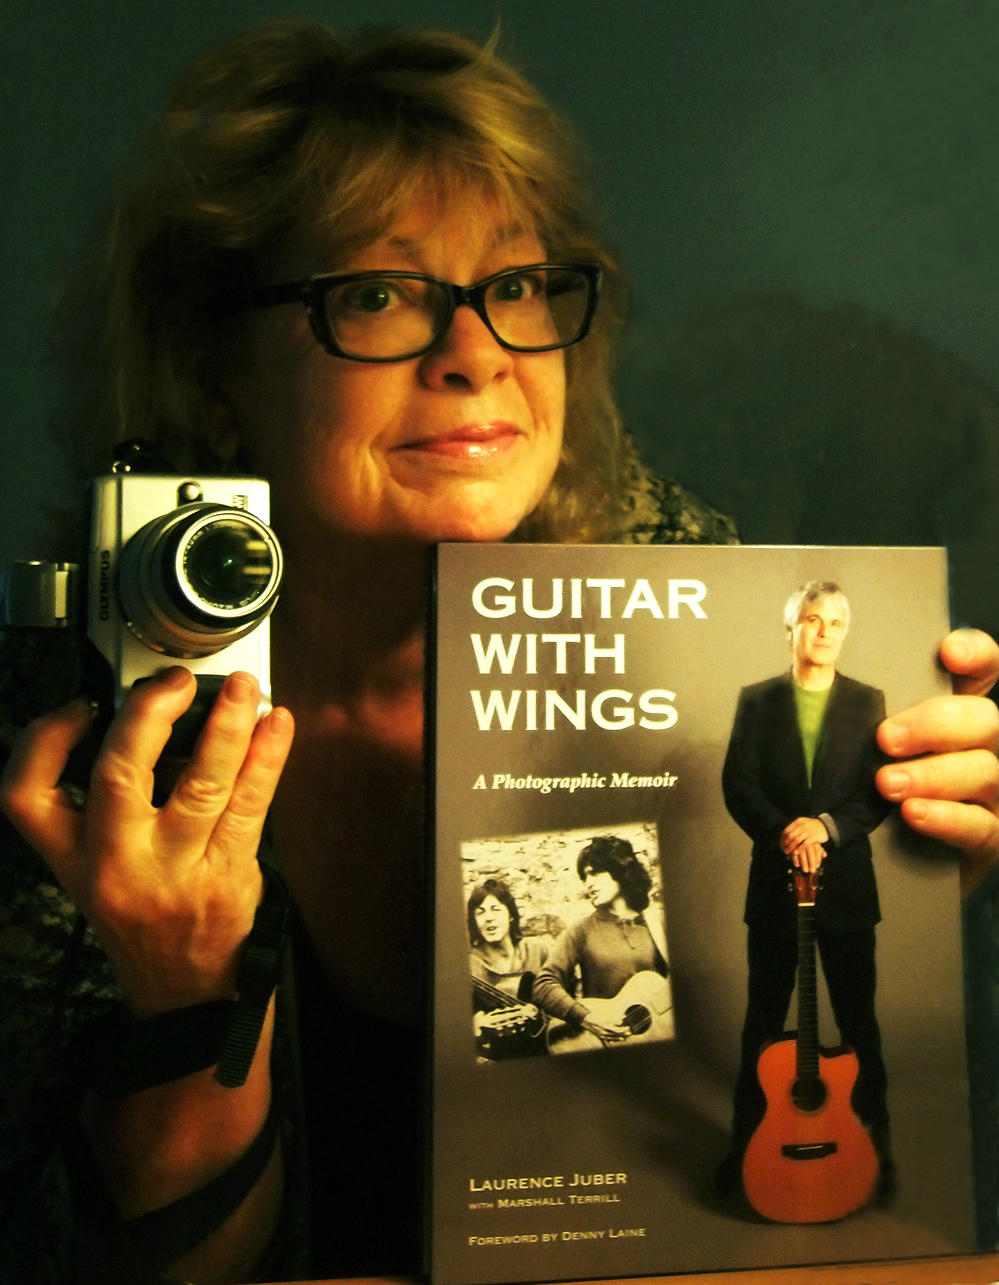 www.GuitarWithWings.com